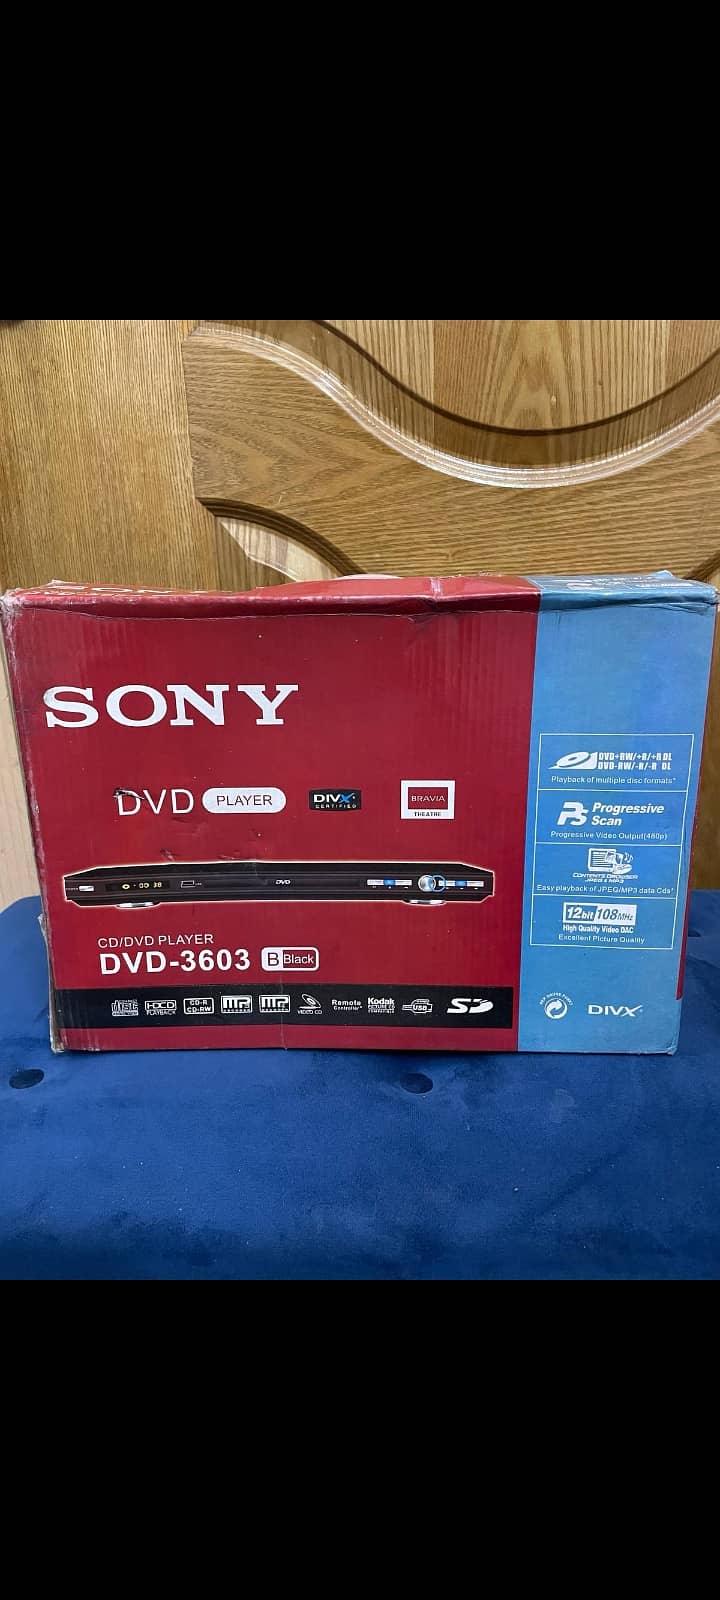 SONY CD DVD Player England UK IMPORTED 3